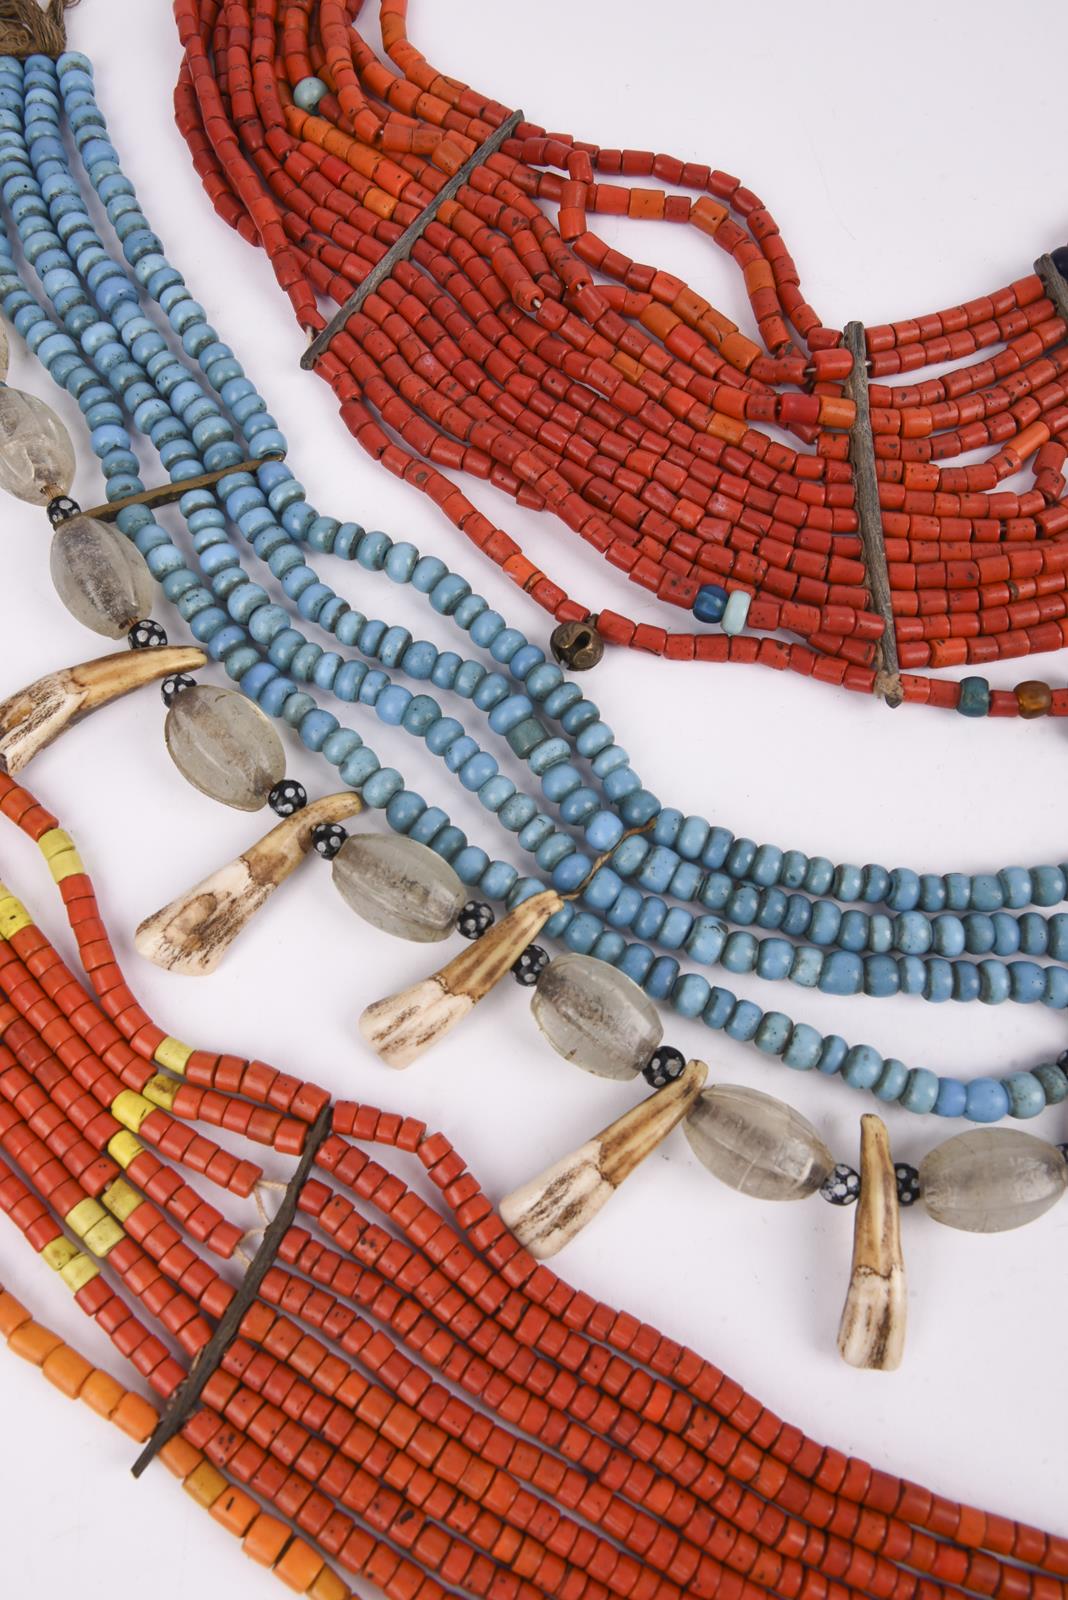 Three Naga necklaces Nagaland coloured and clear glass beads, brass and bone spacers, pig teeth - Image 3 of 6